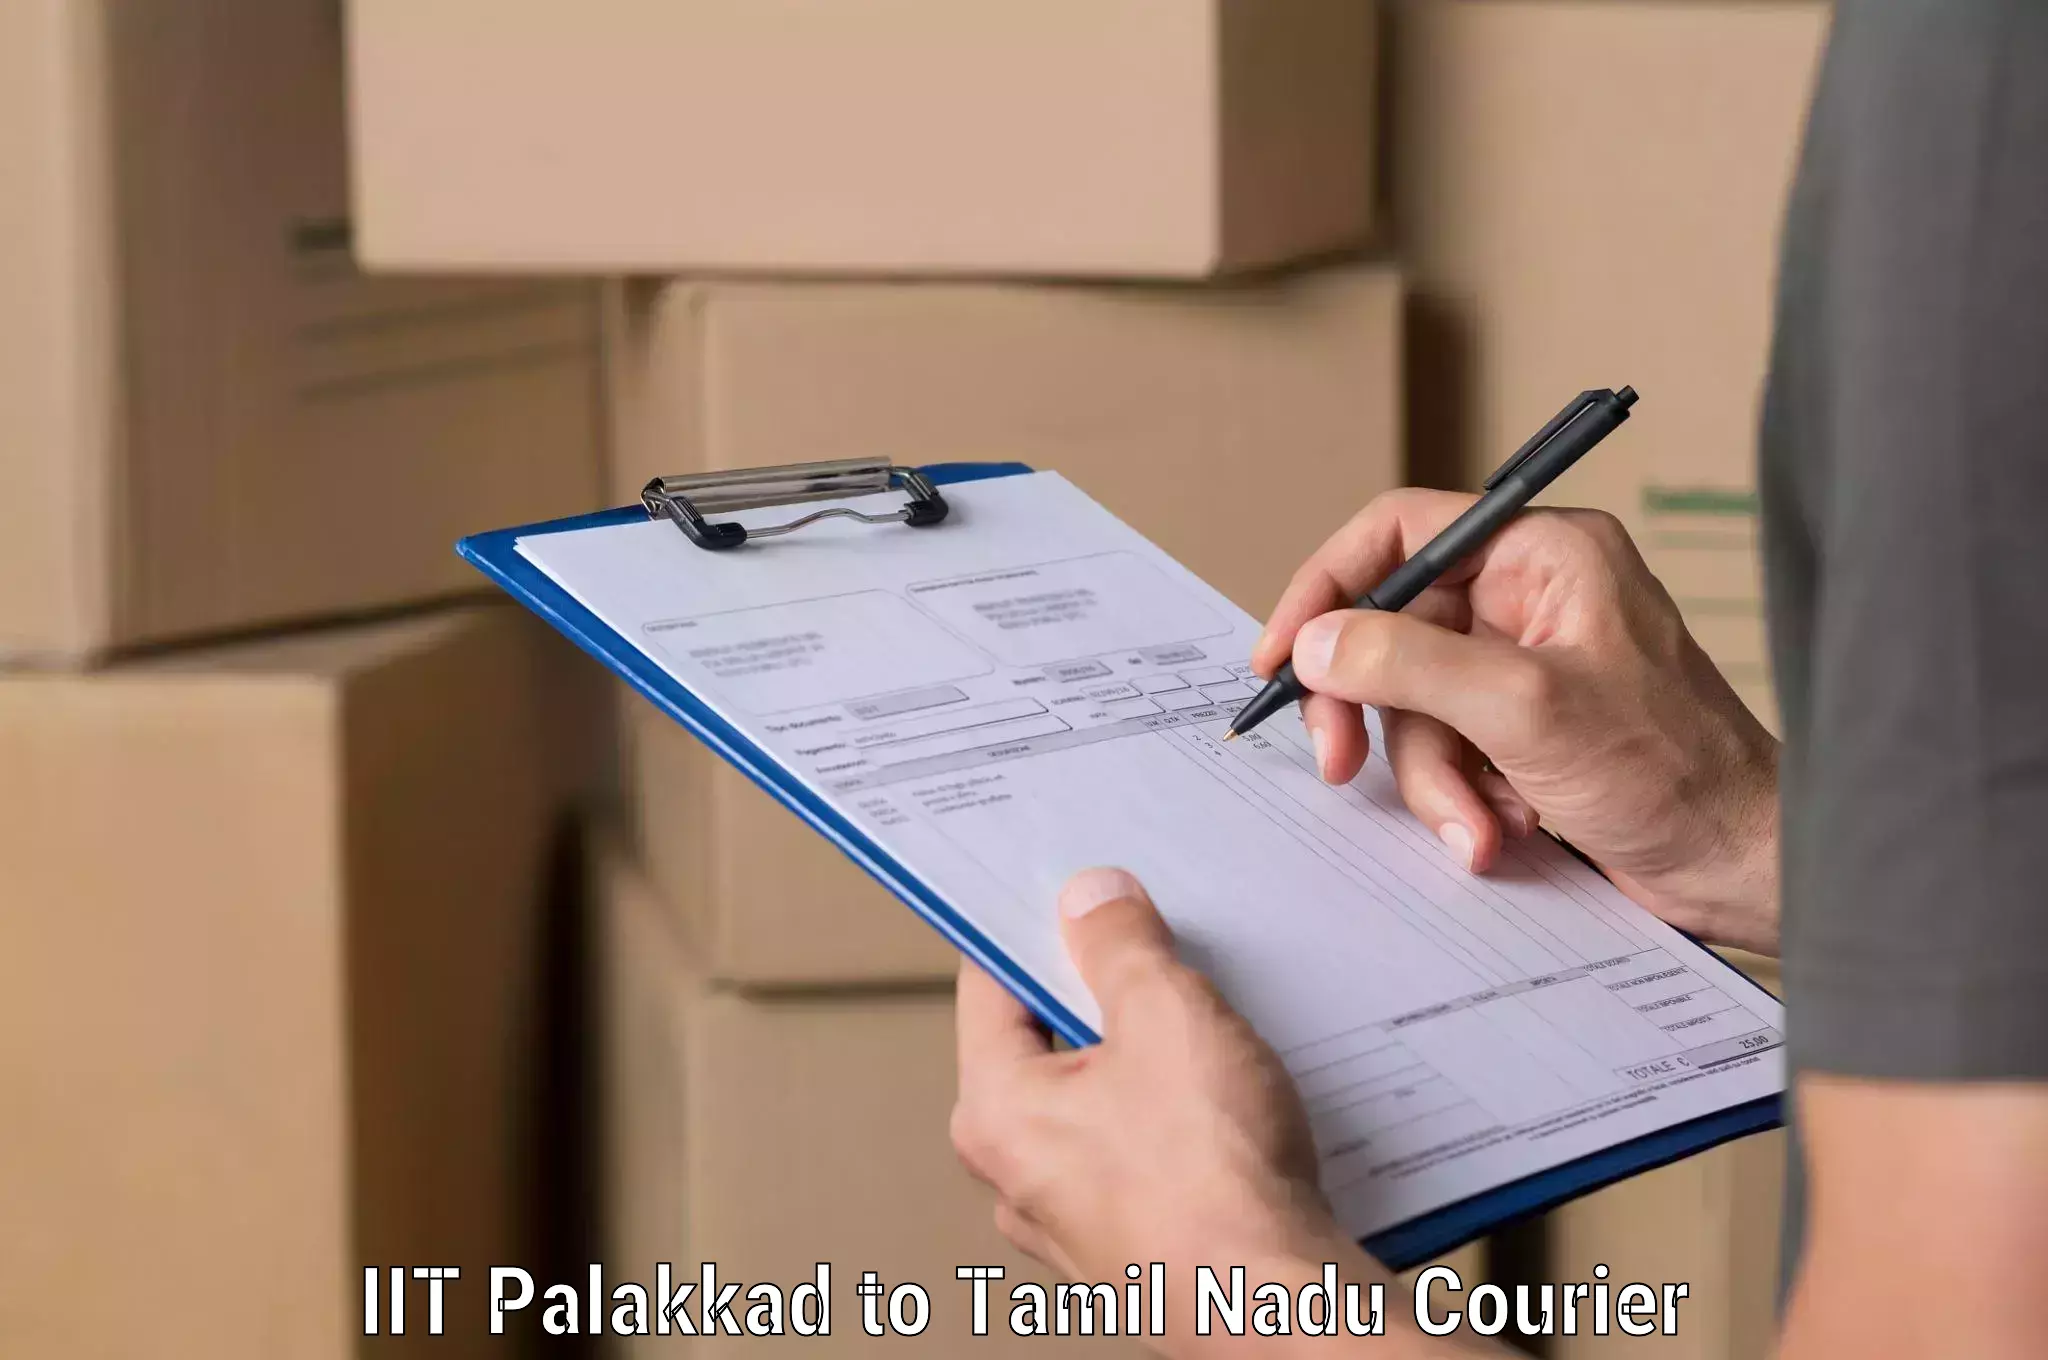 International courier networks IIT Palakkad to Hosur